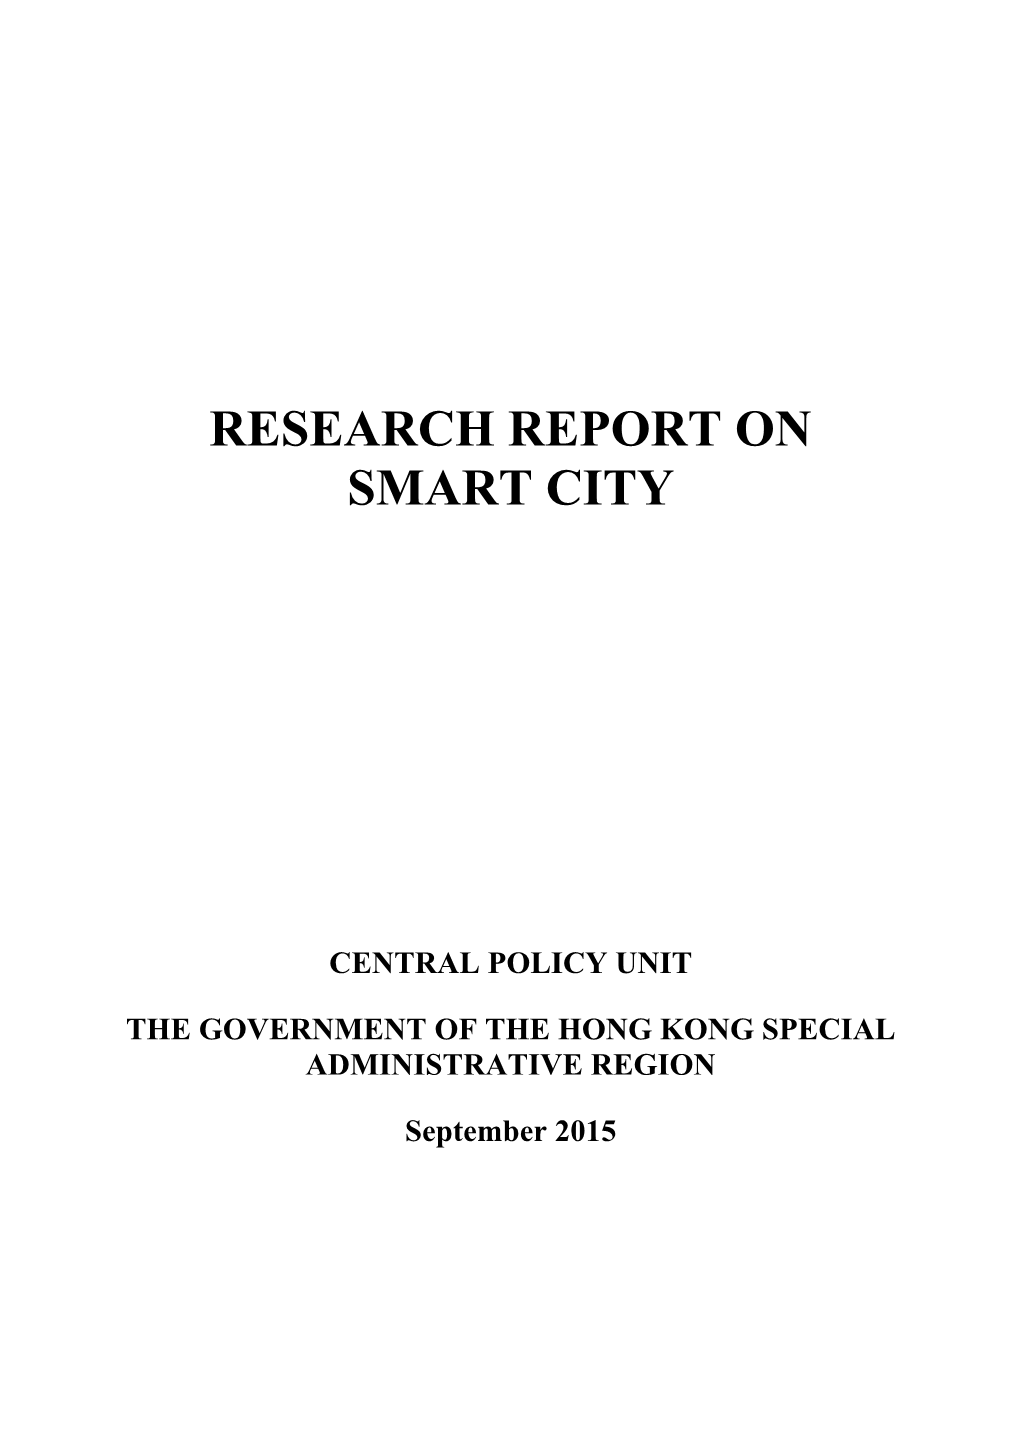 Research Report on Smart City